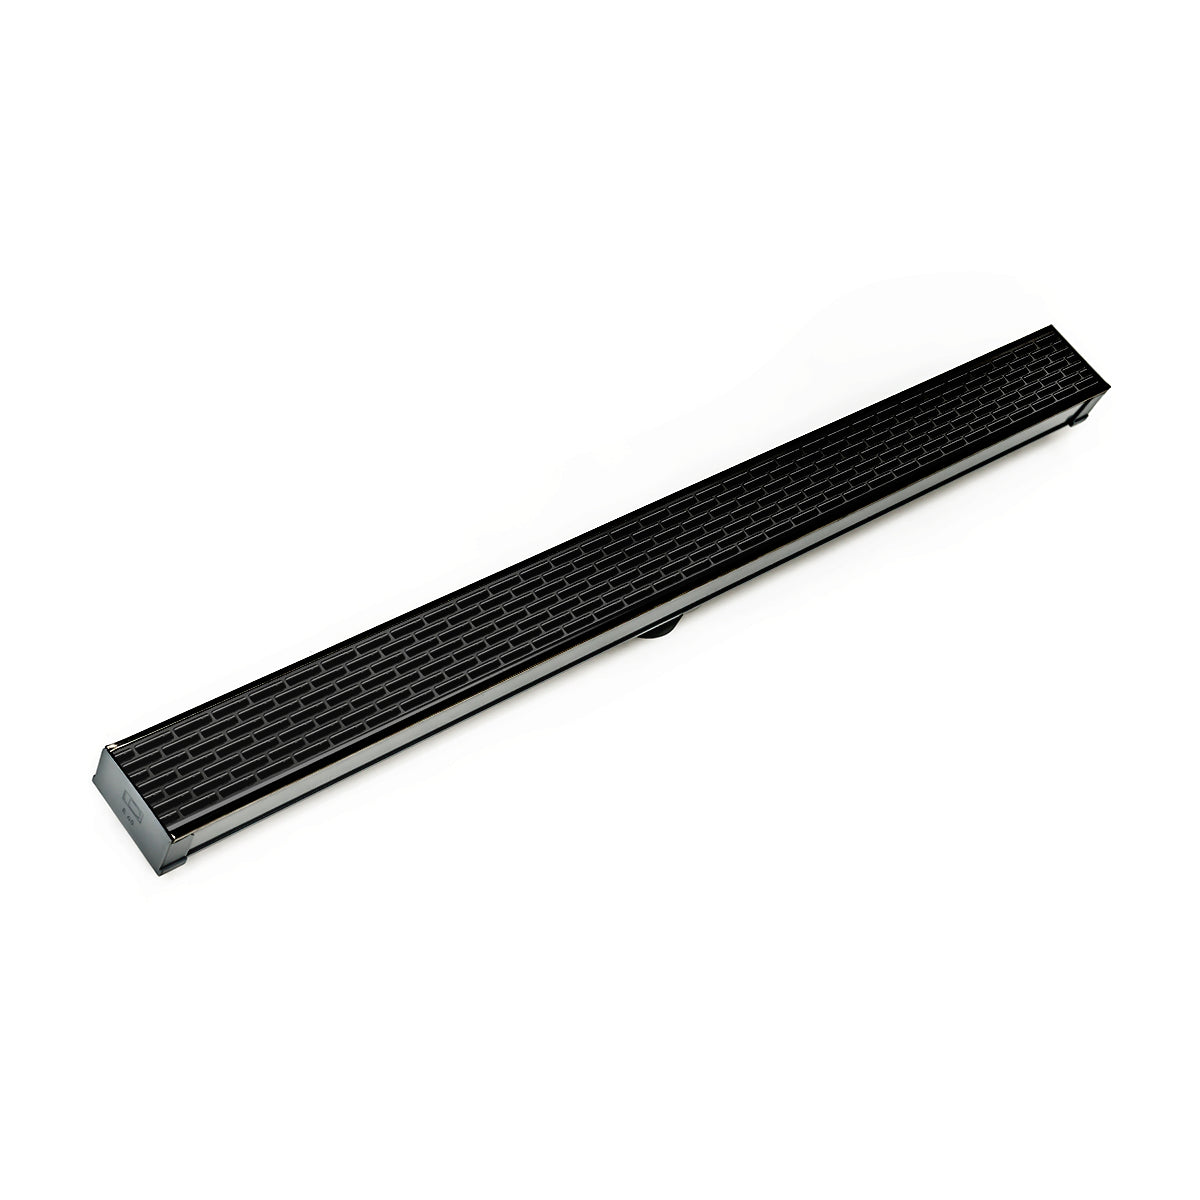 Infinity Drain 72" S-PVC Series Low Profile Site Sizable Linear Drain Kit with 2 1/2" Perforated Offset Slot Grate